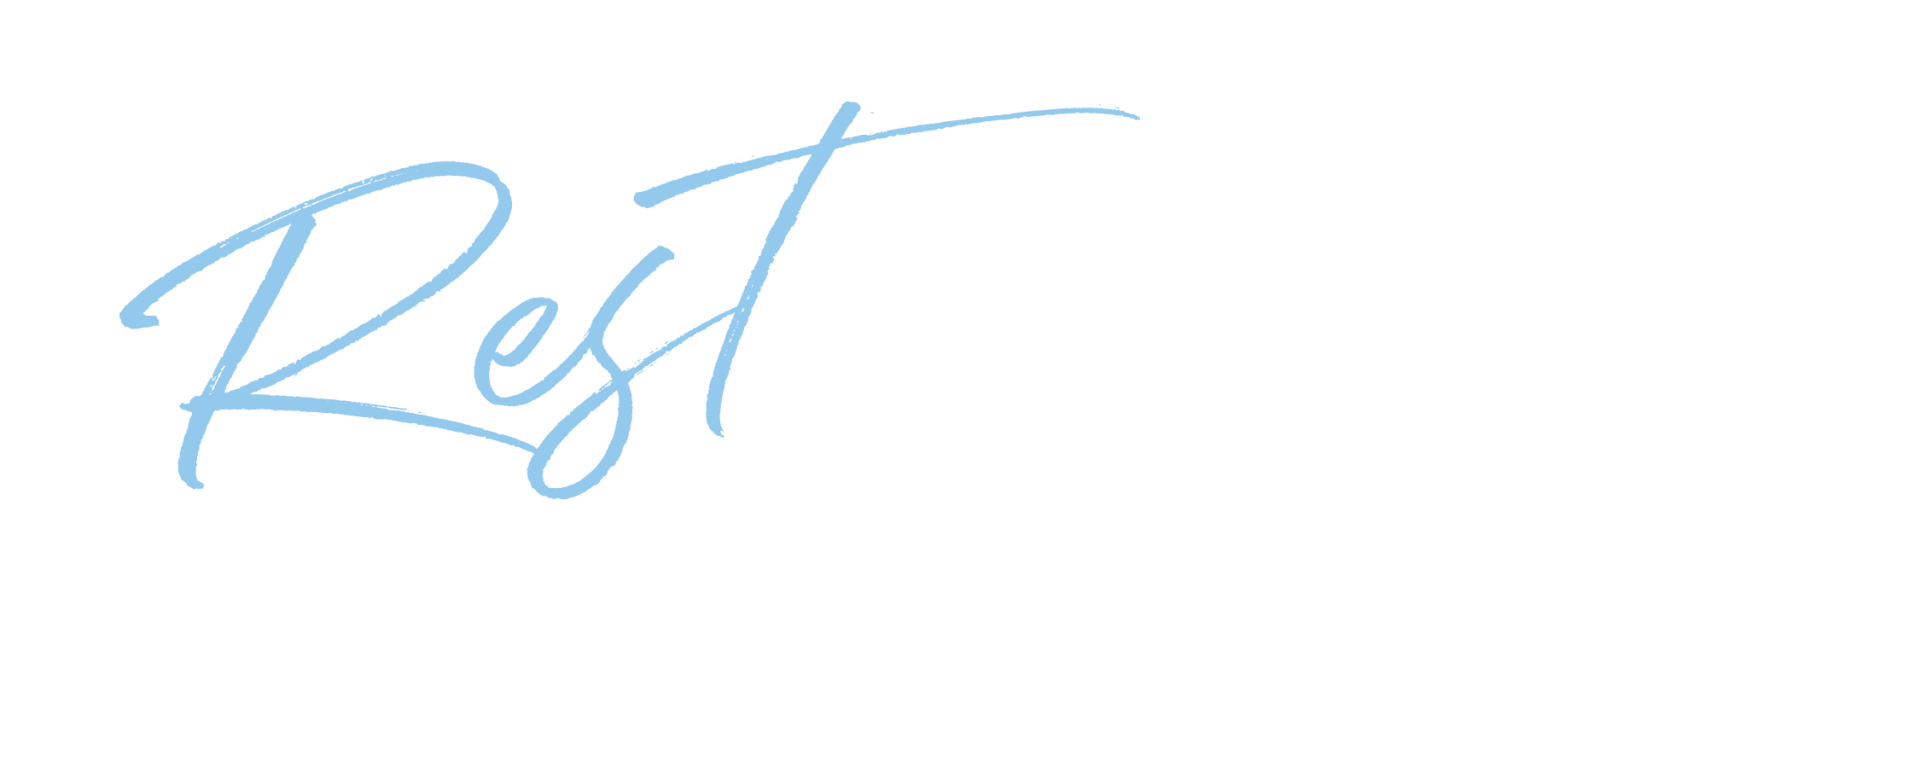 Testimonial from comfortable customers